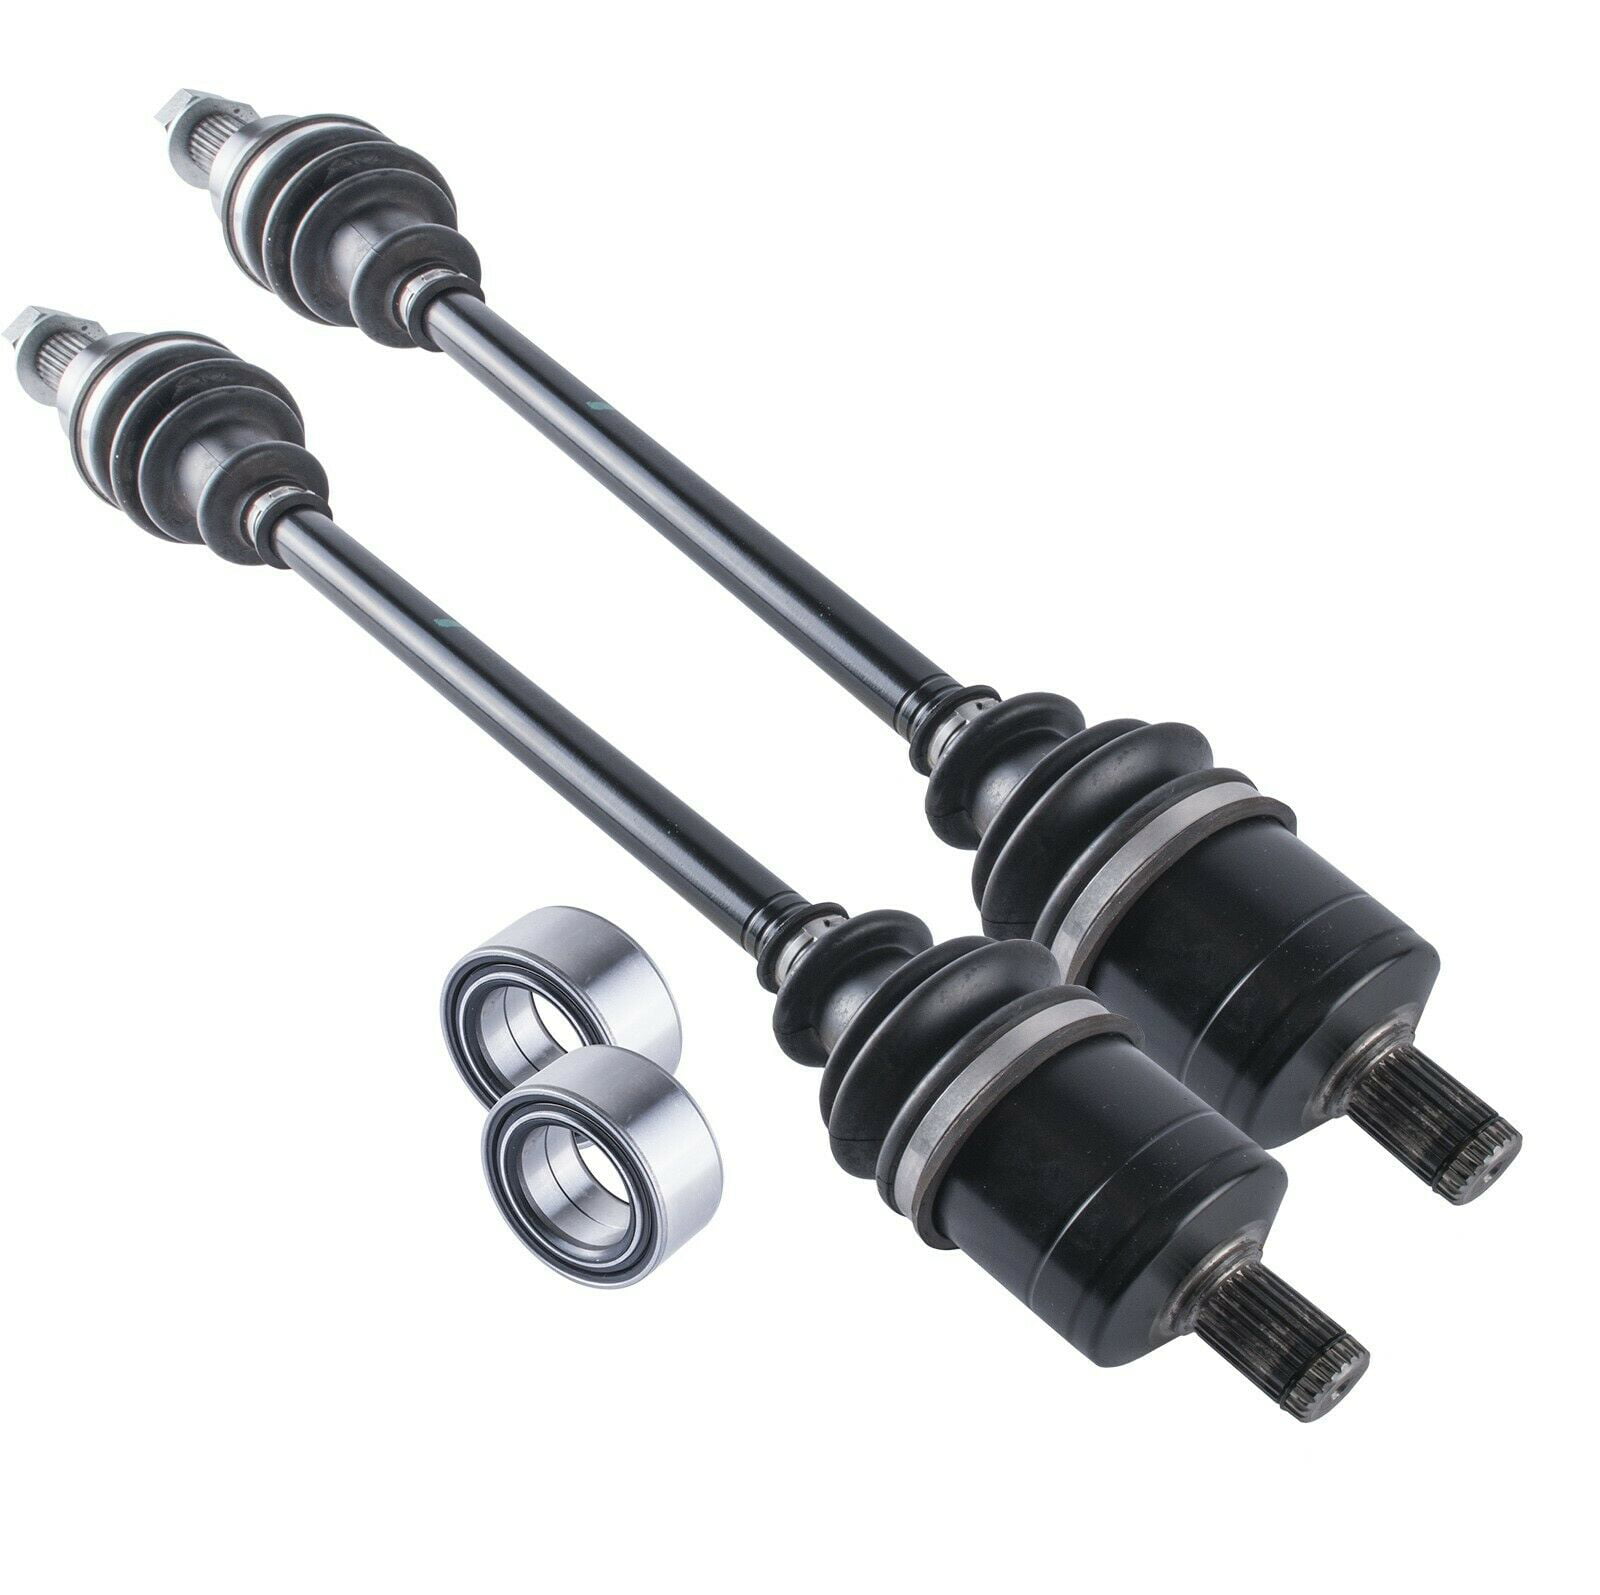 Caltric compatible with Front Left Complete Cv Joint Axle Polaris Rzr Xp 900 2011 2012 2013 